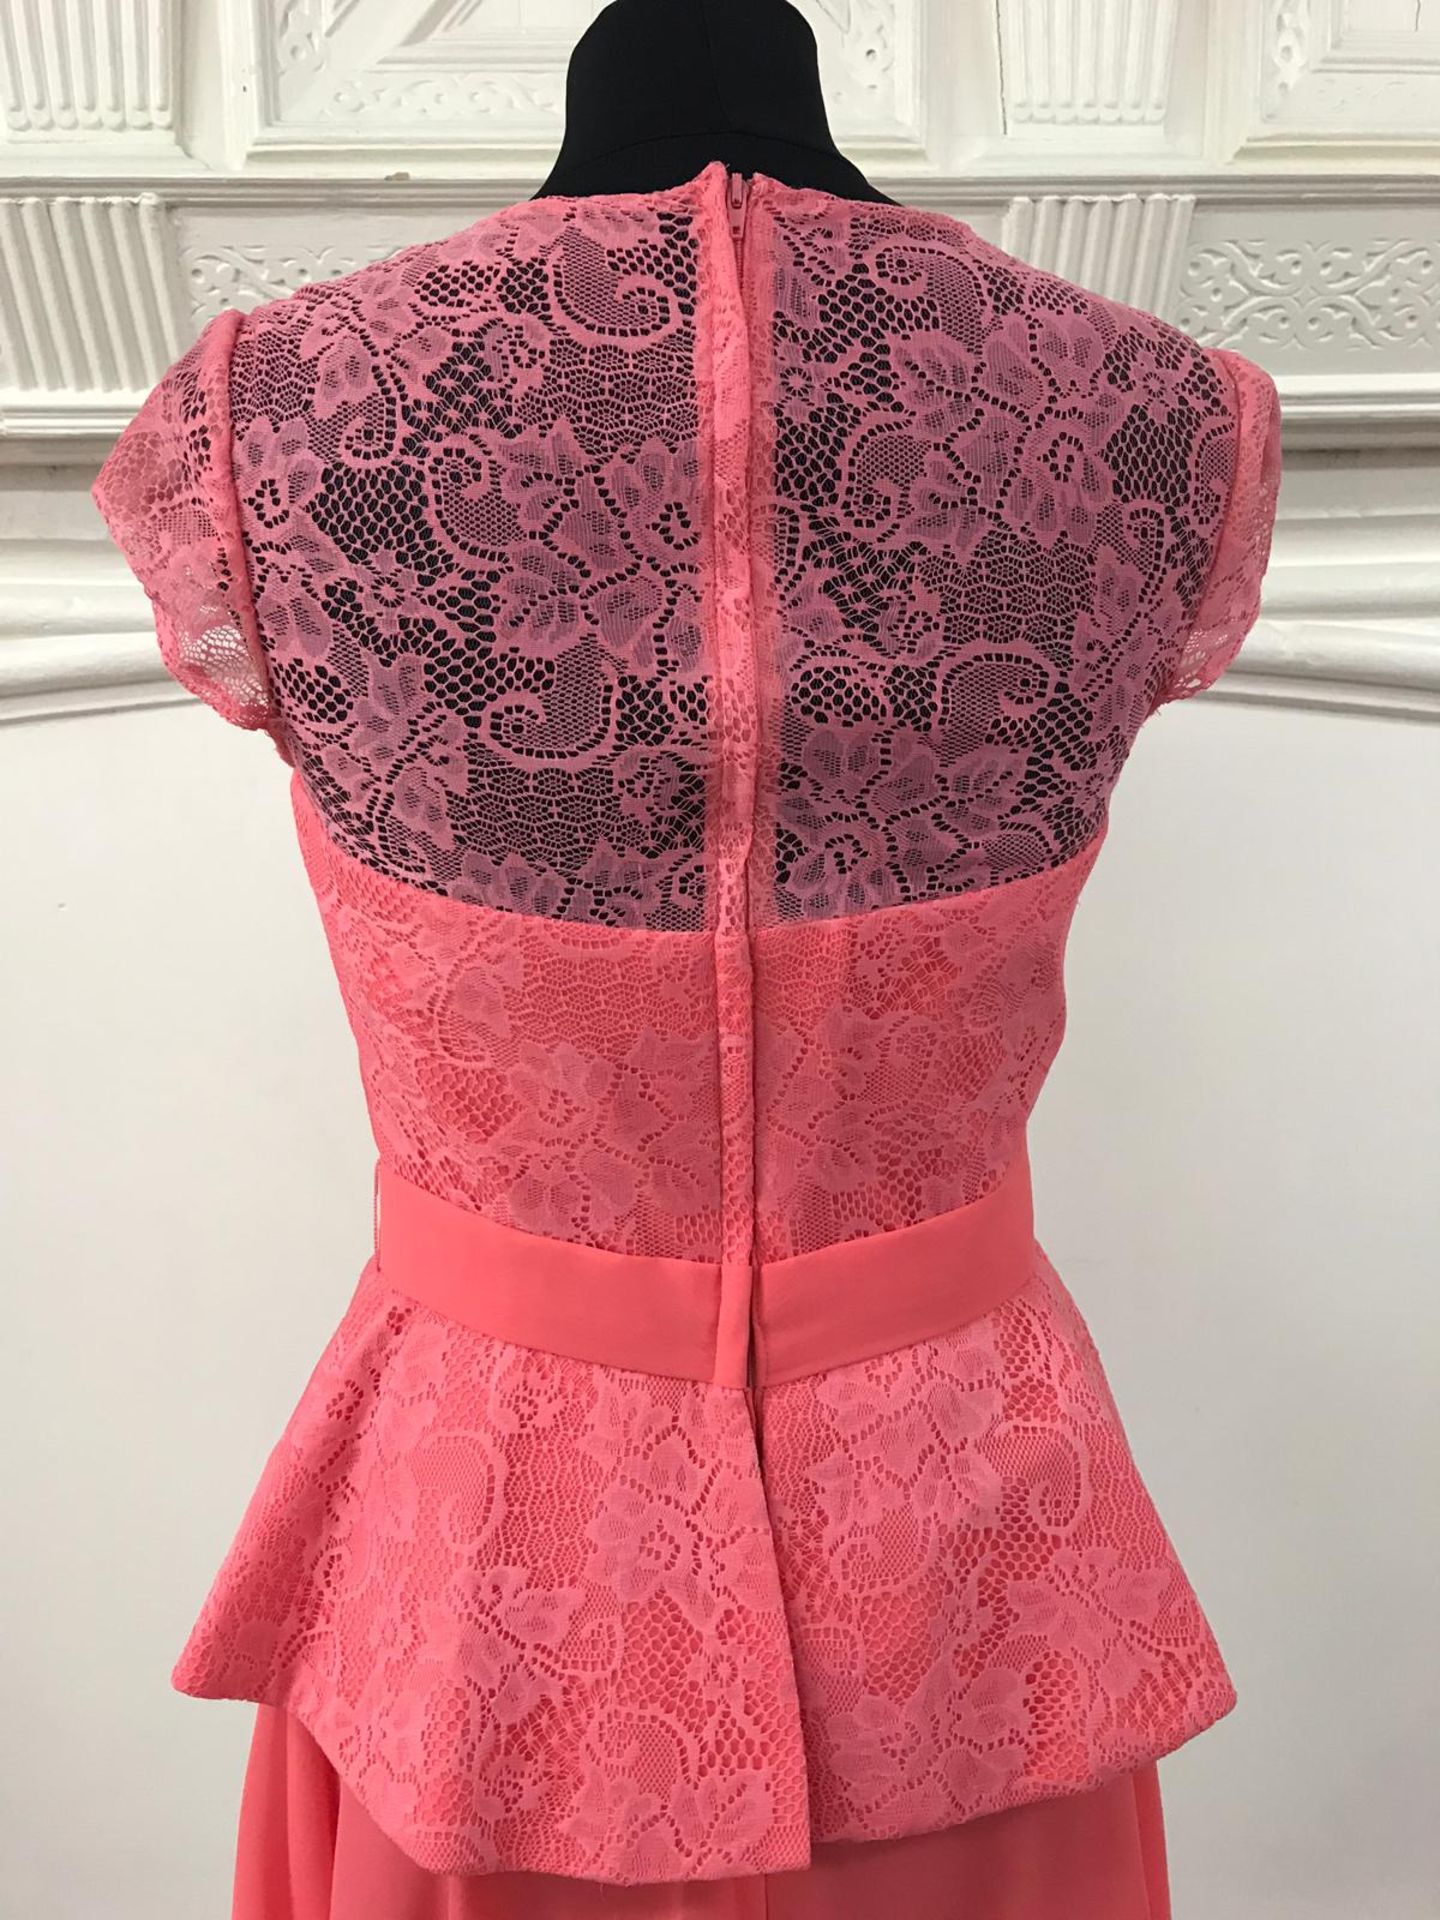 Short Coral Dress Size 6 Lace top - Image 3 of 4